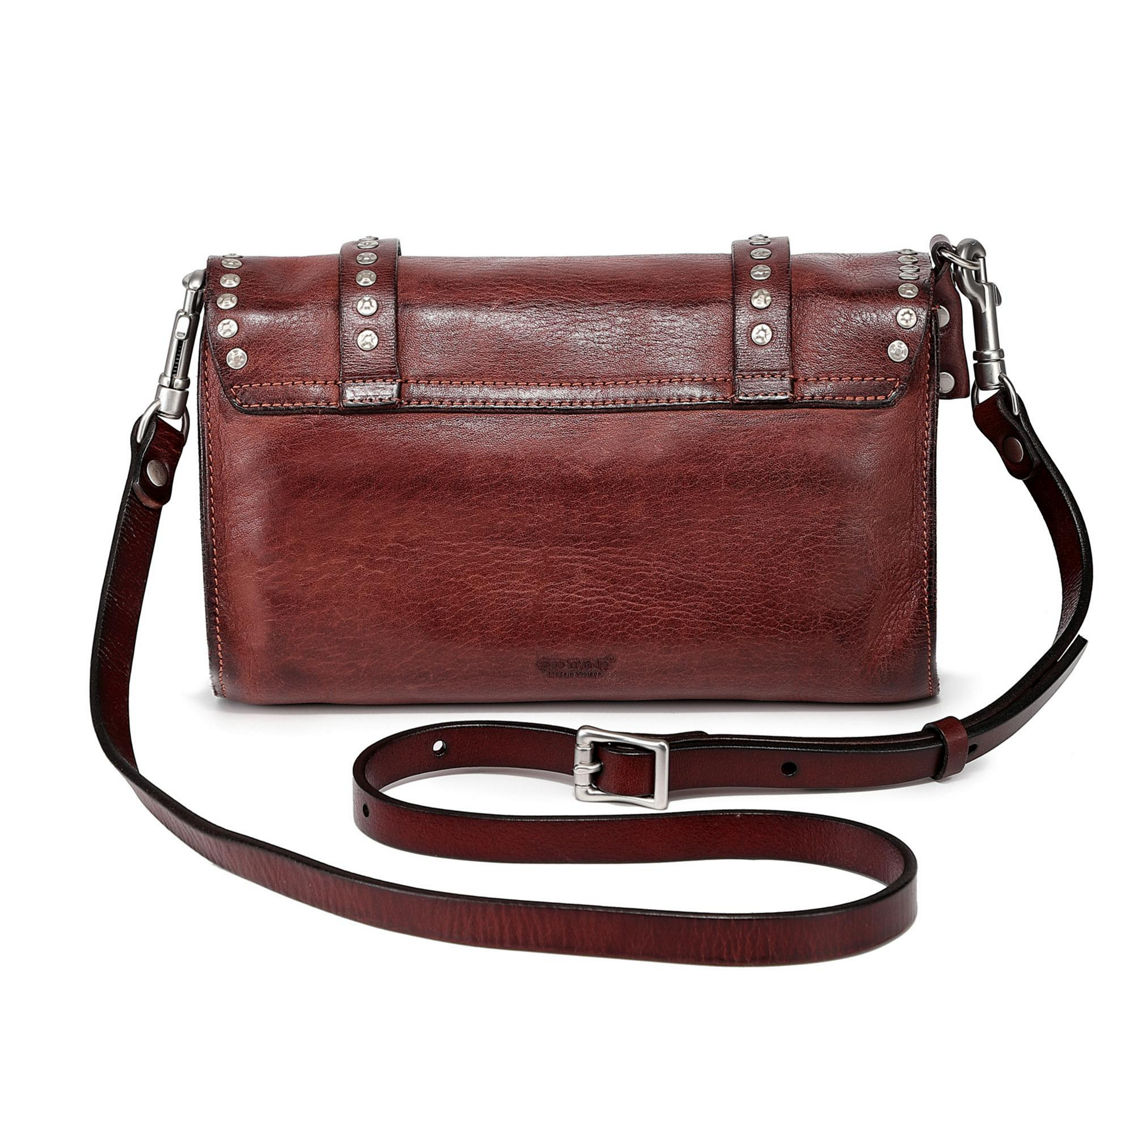 Old Trend Soul Stud Convertible Leather Crossbody - Image 5 of 5